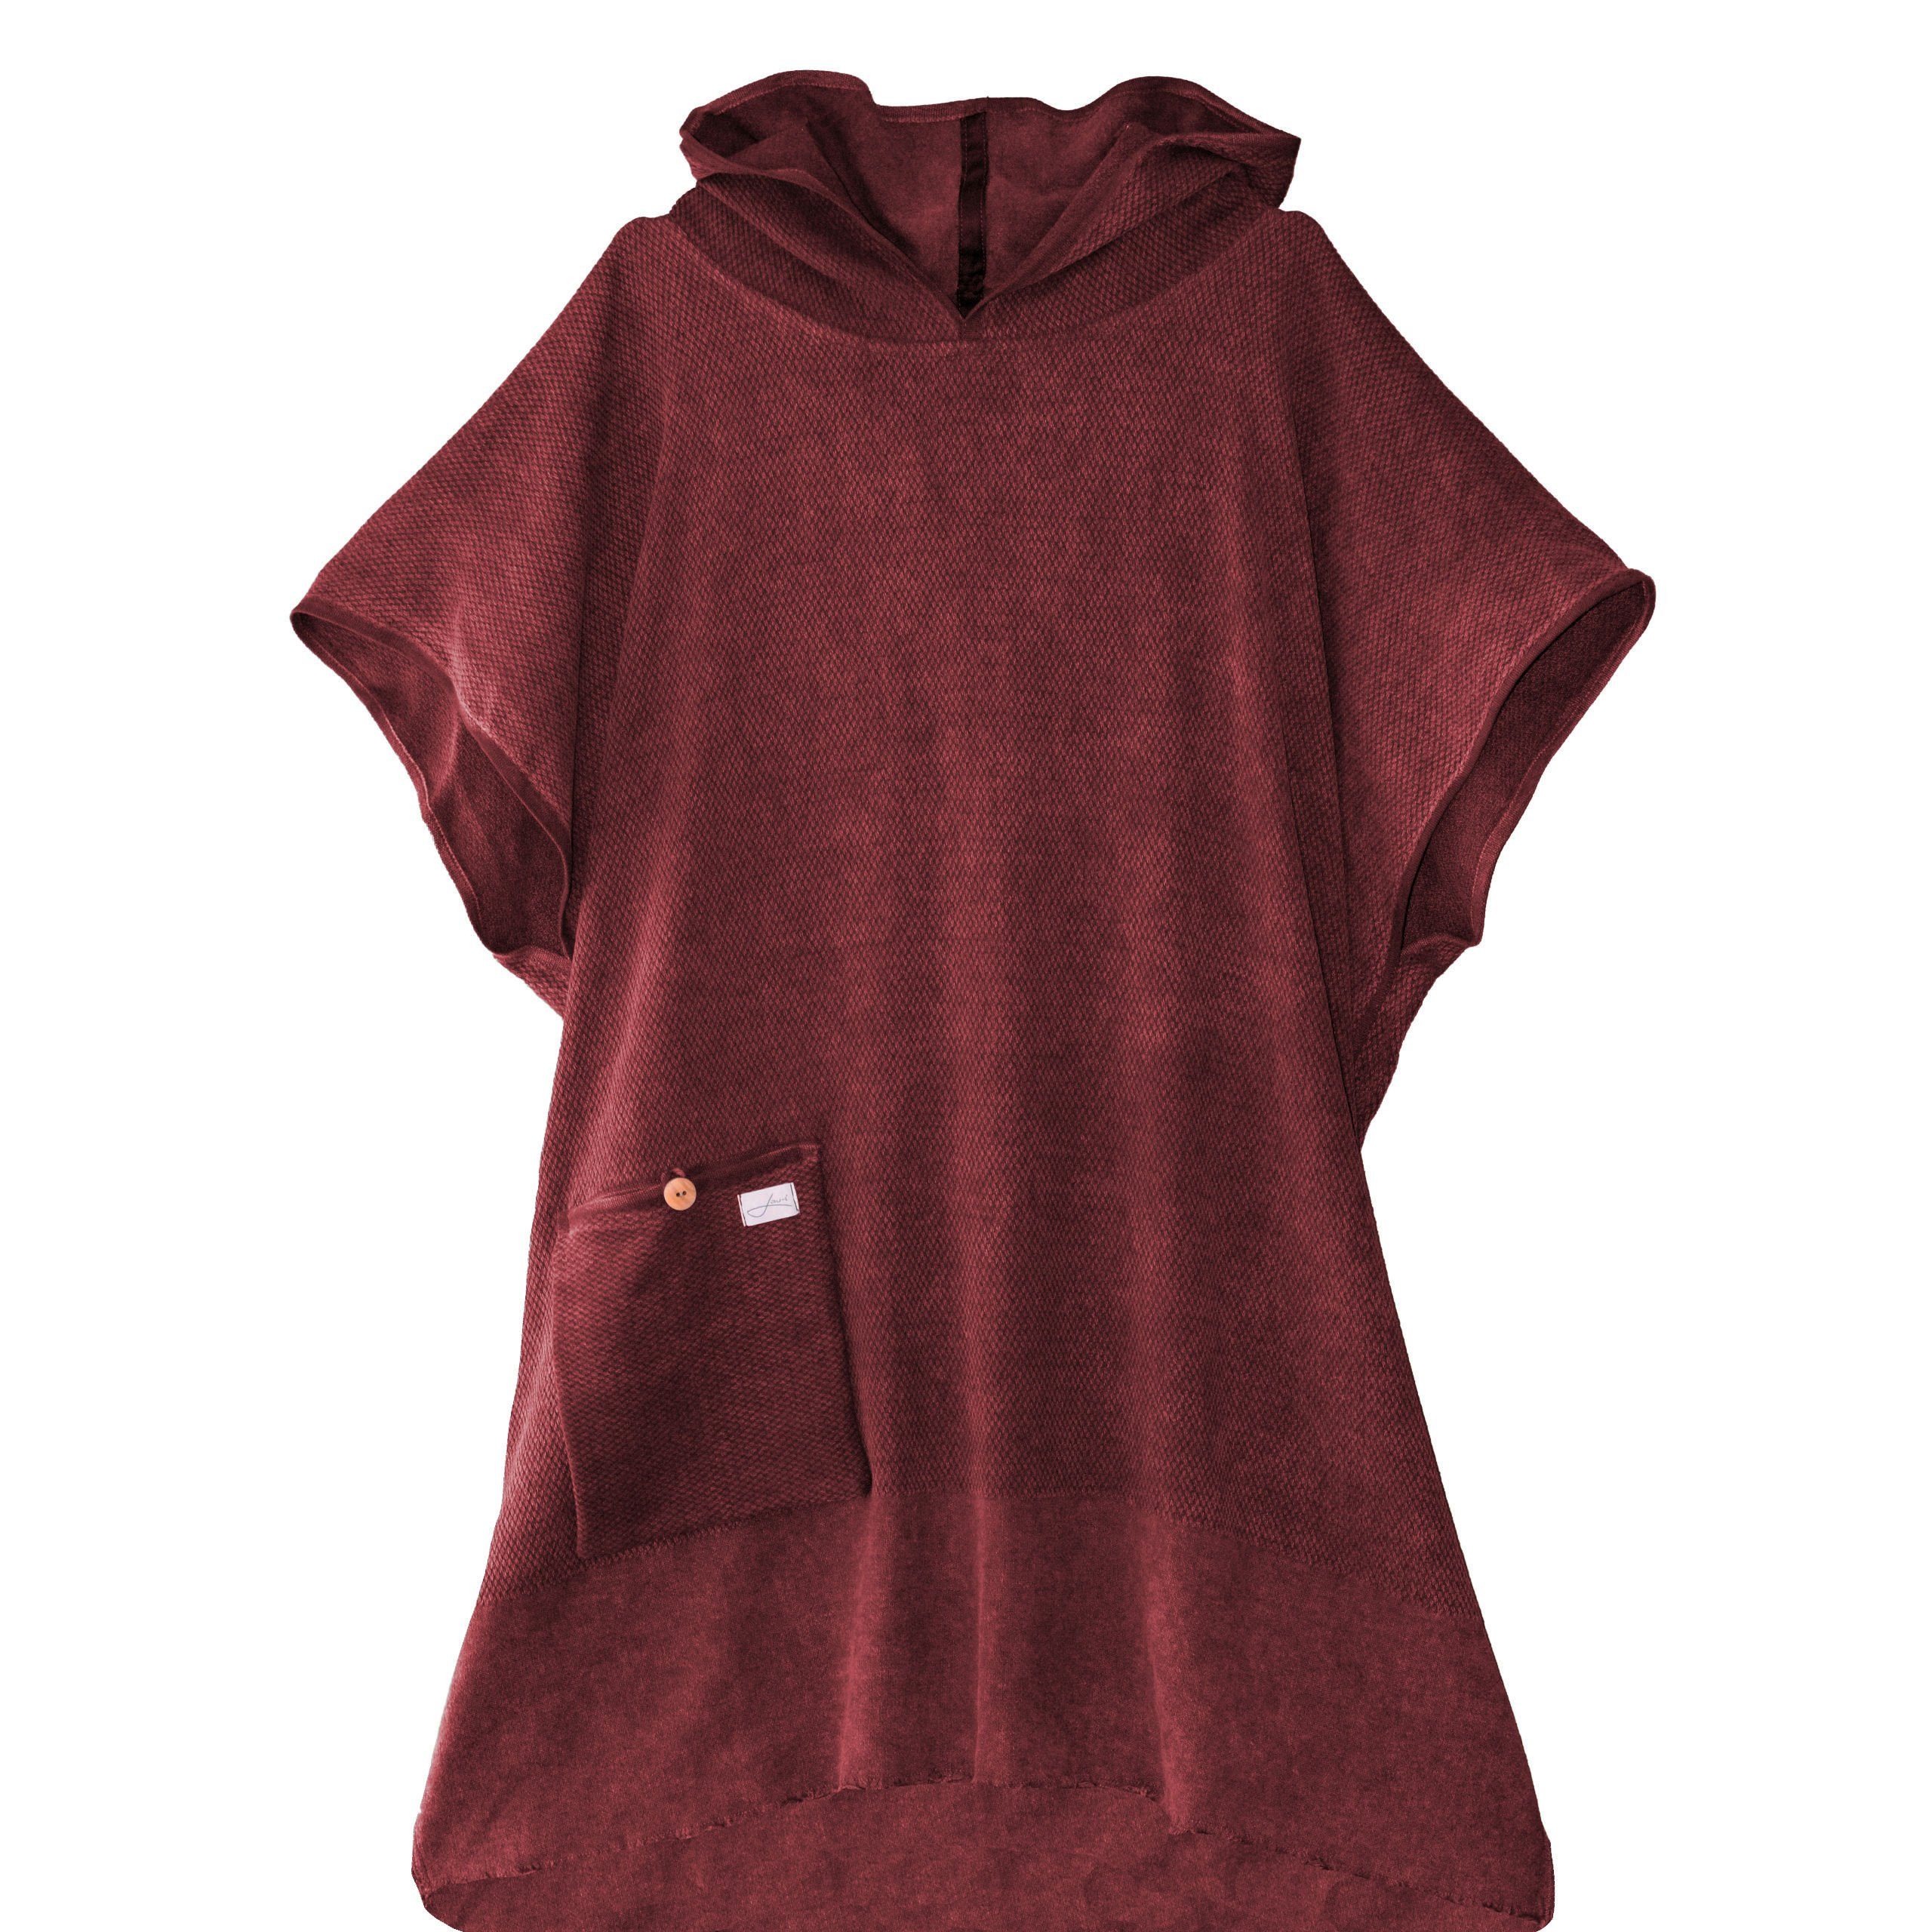 Badeponcho Germany burgundy Made schnell trocken), (leicht & Badeponcho in Kapuze Surfponcho Lou-i